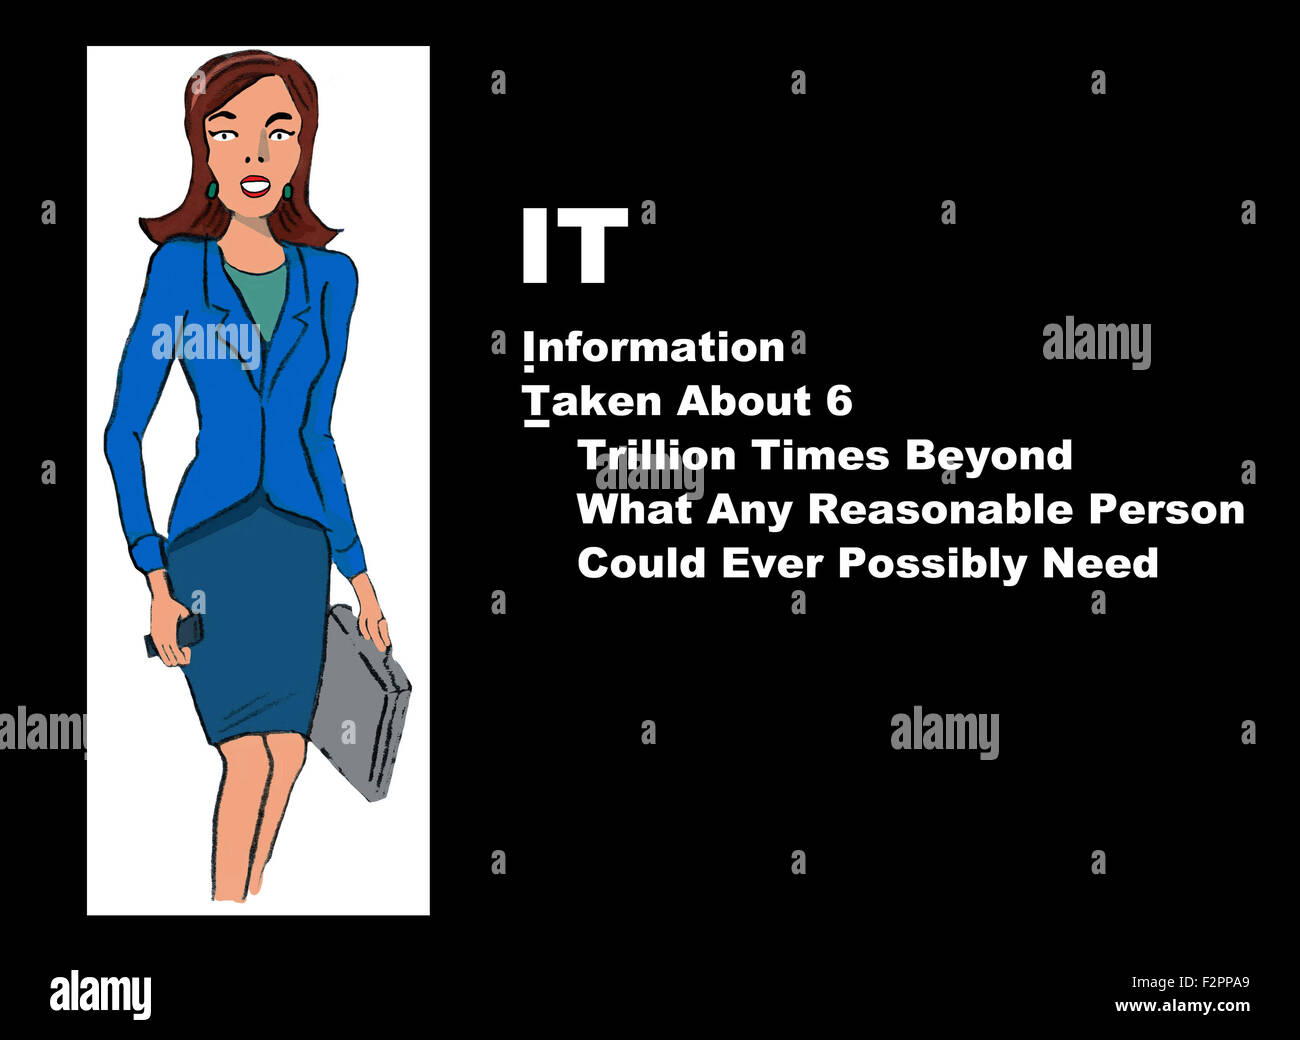 Technology and business illustration of businesswoman, the acronym 'IT' and the play on words, 'Information Taken about ...'. Stock Photo